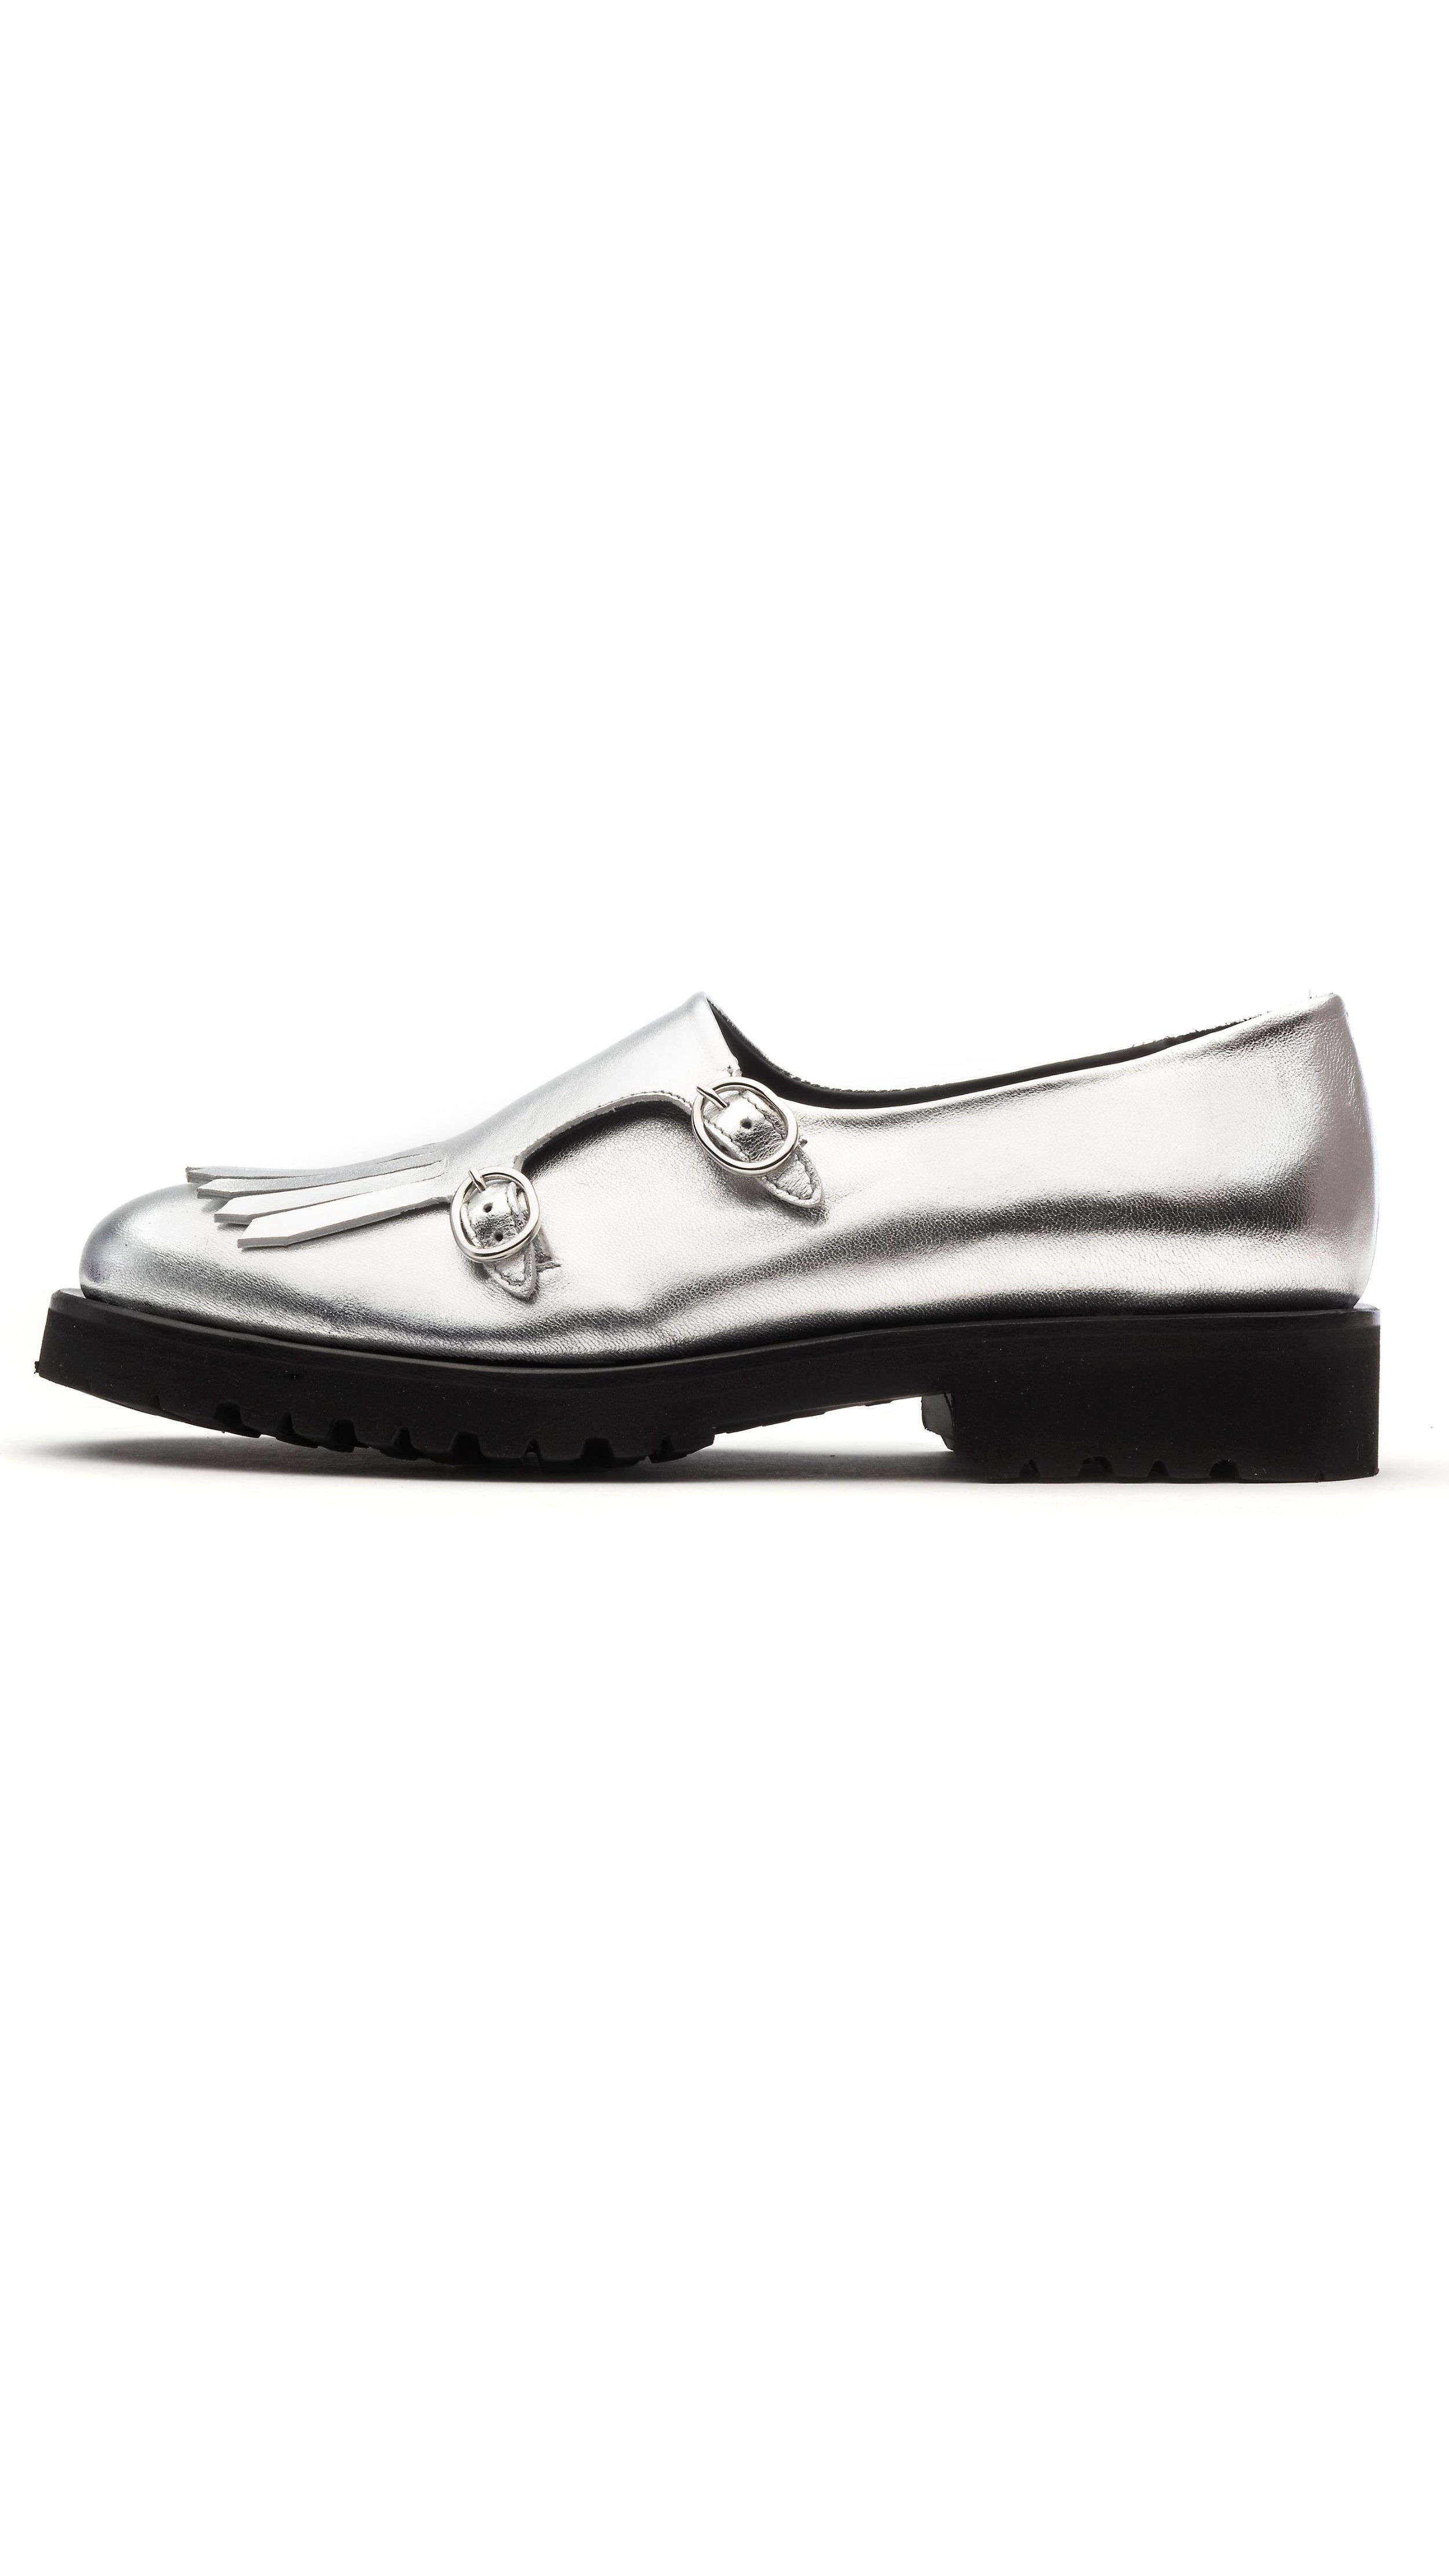 The Cedar Brogues are handcrafted in Italy with luxurious soft metallic silver calf skin. They have side buckles and fringing to the toe for a distinctive finish. The 10mm platform heel. Photo facing the side